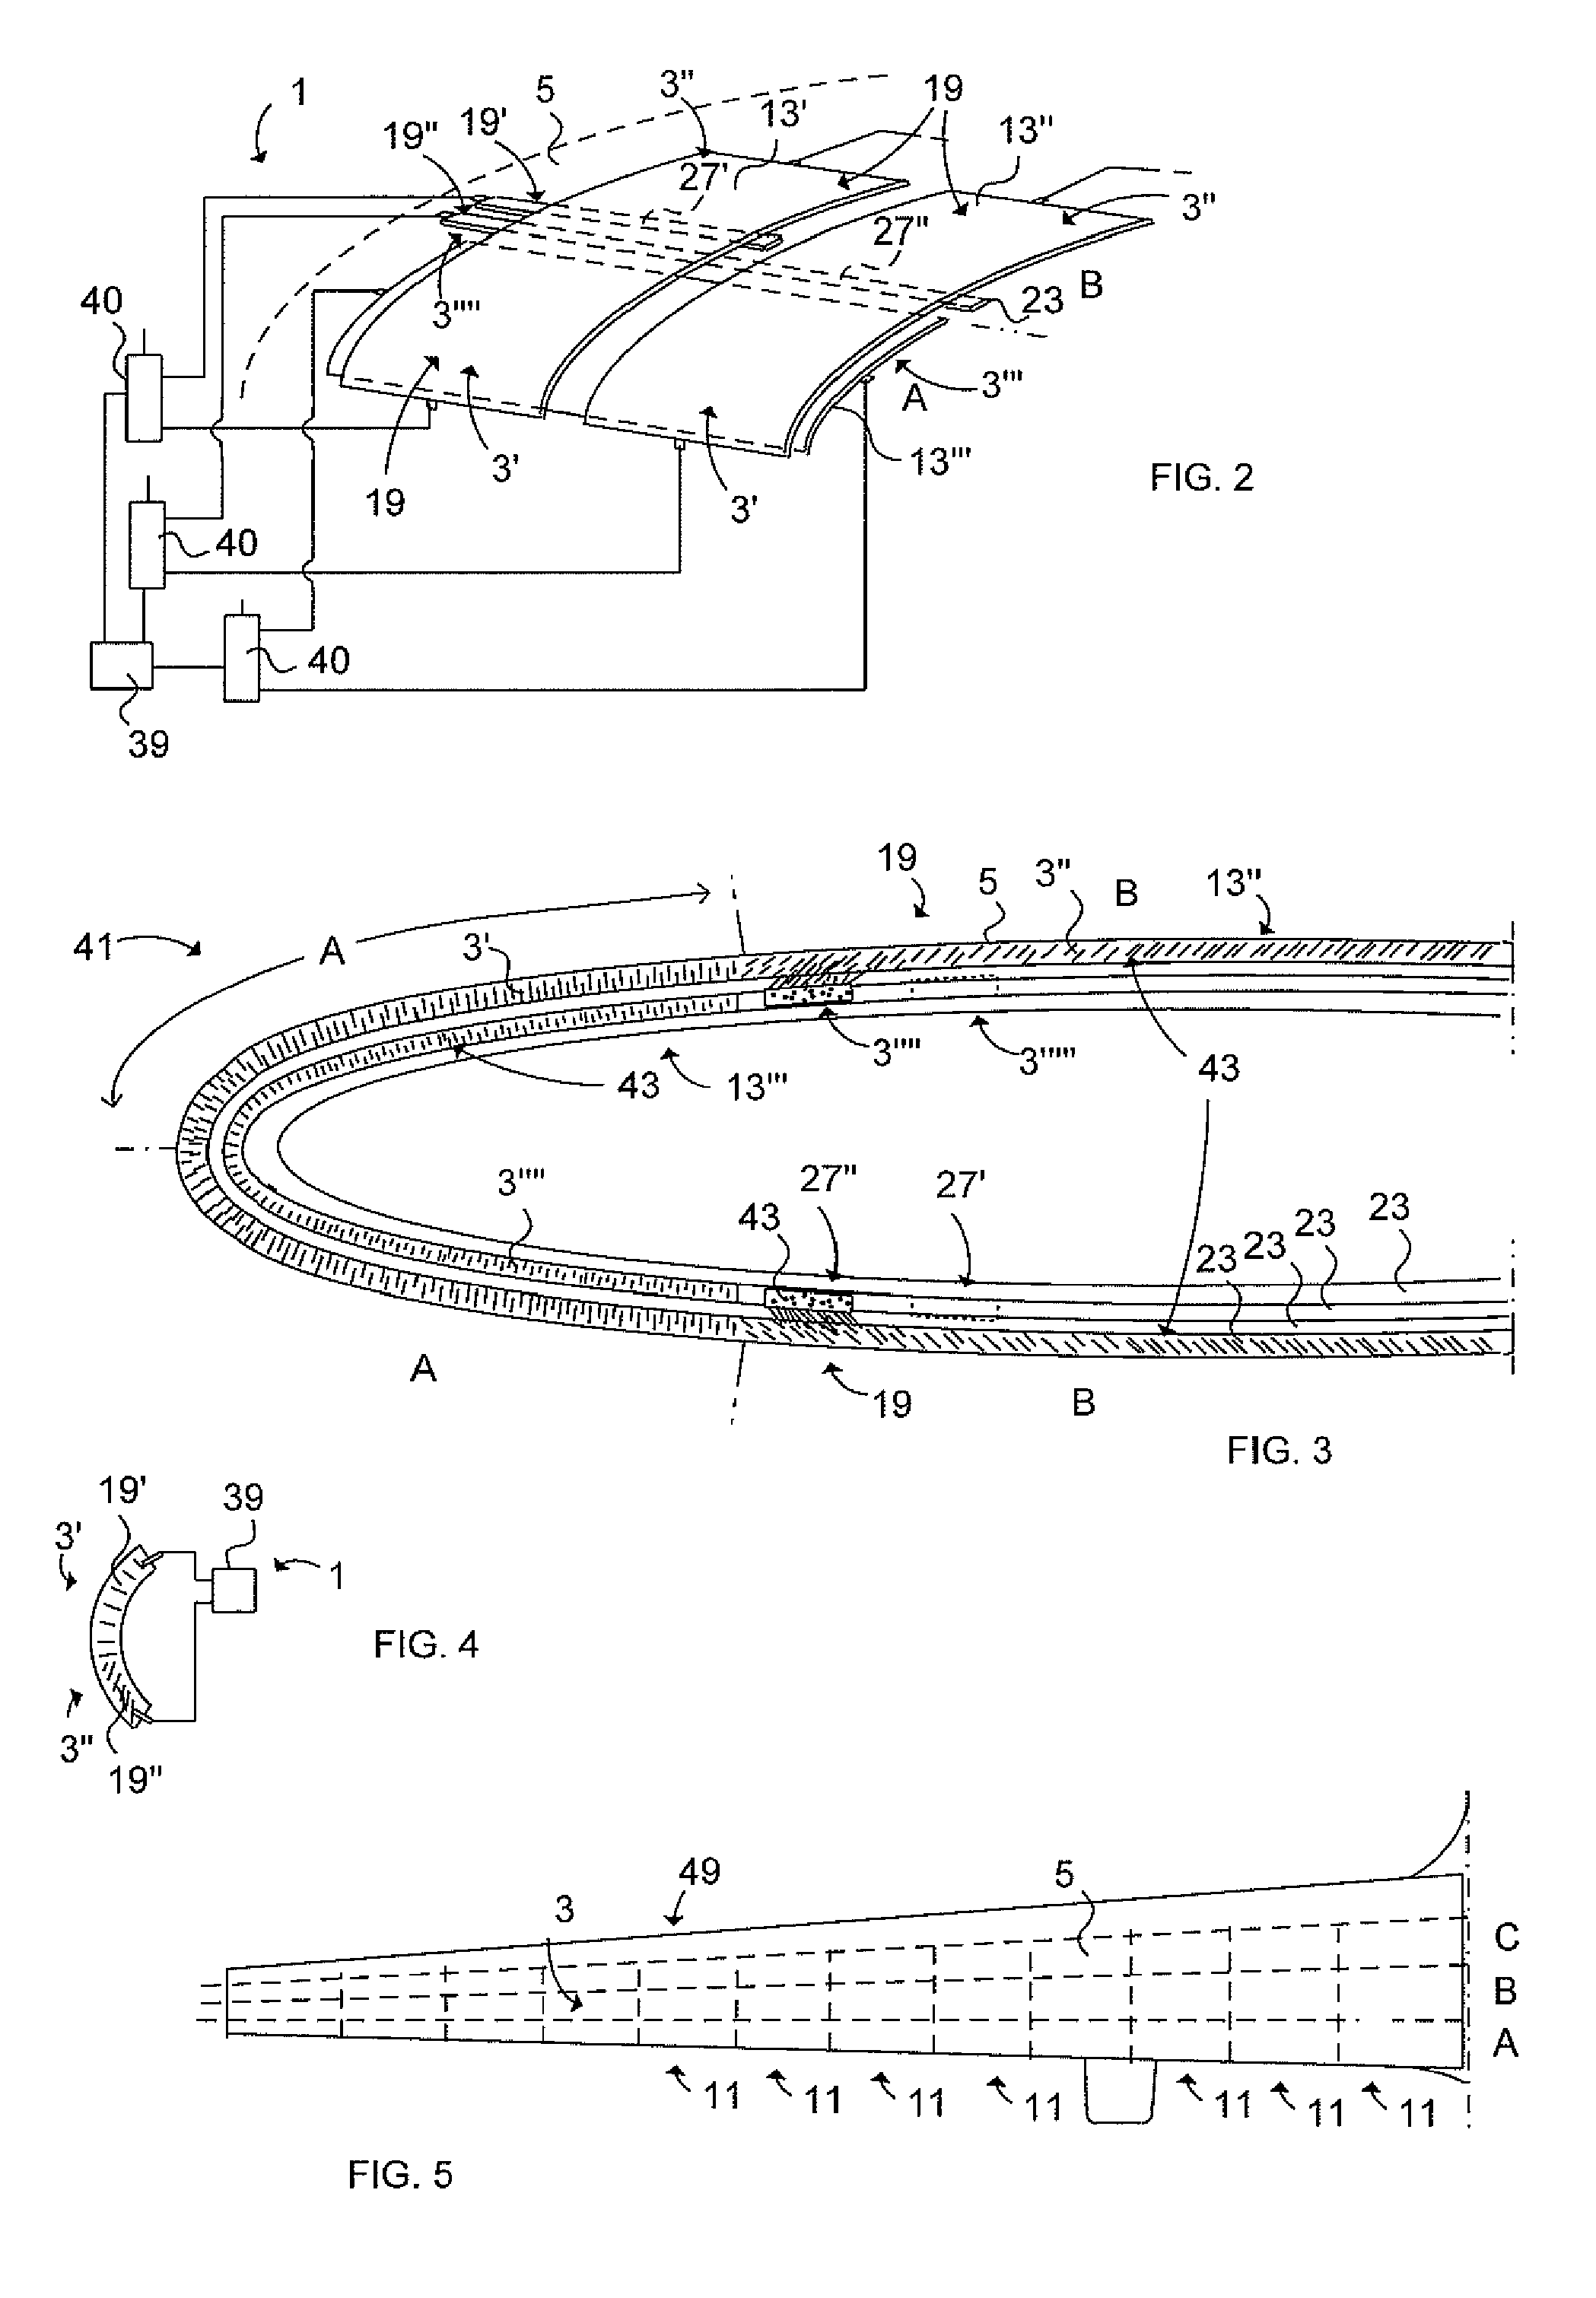 Multifunctional de-icing/Anti-icing system